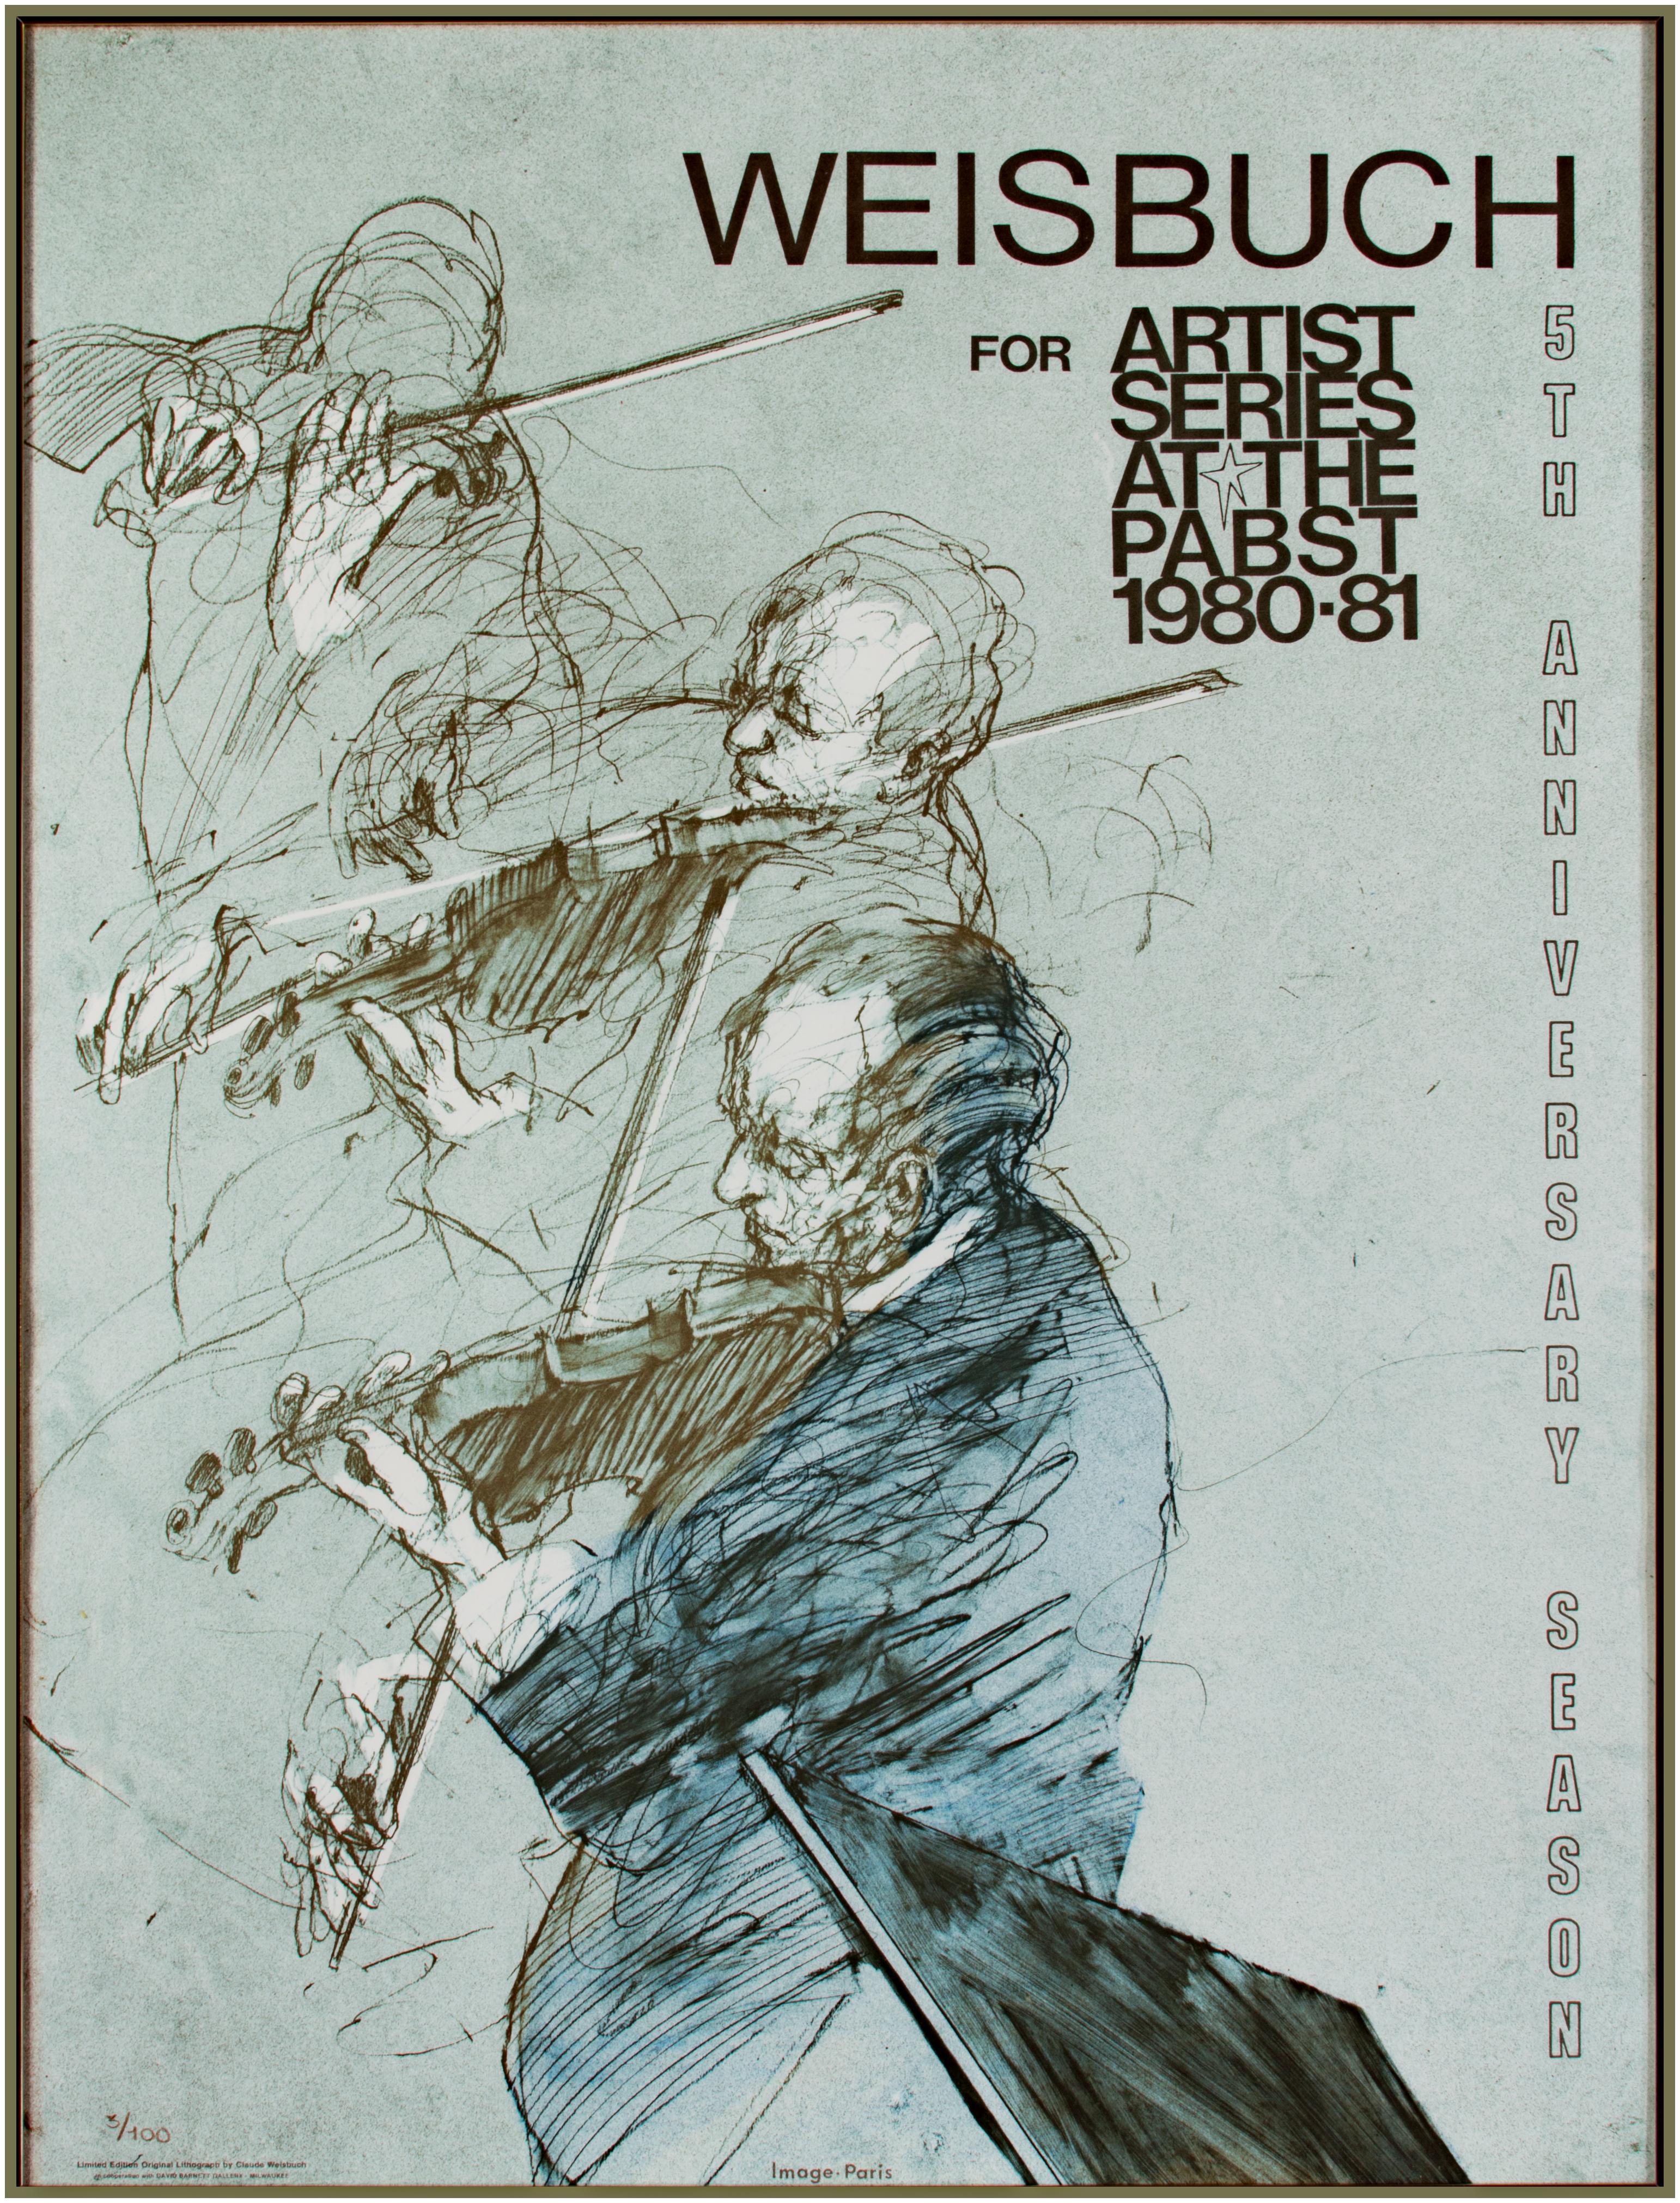 Claude Weisbuch Figurative Print - 'Artist Series at the Pabst' original lithograph poster, violinists 1980s